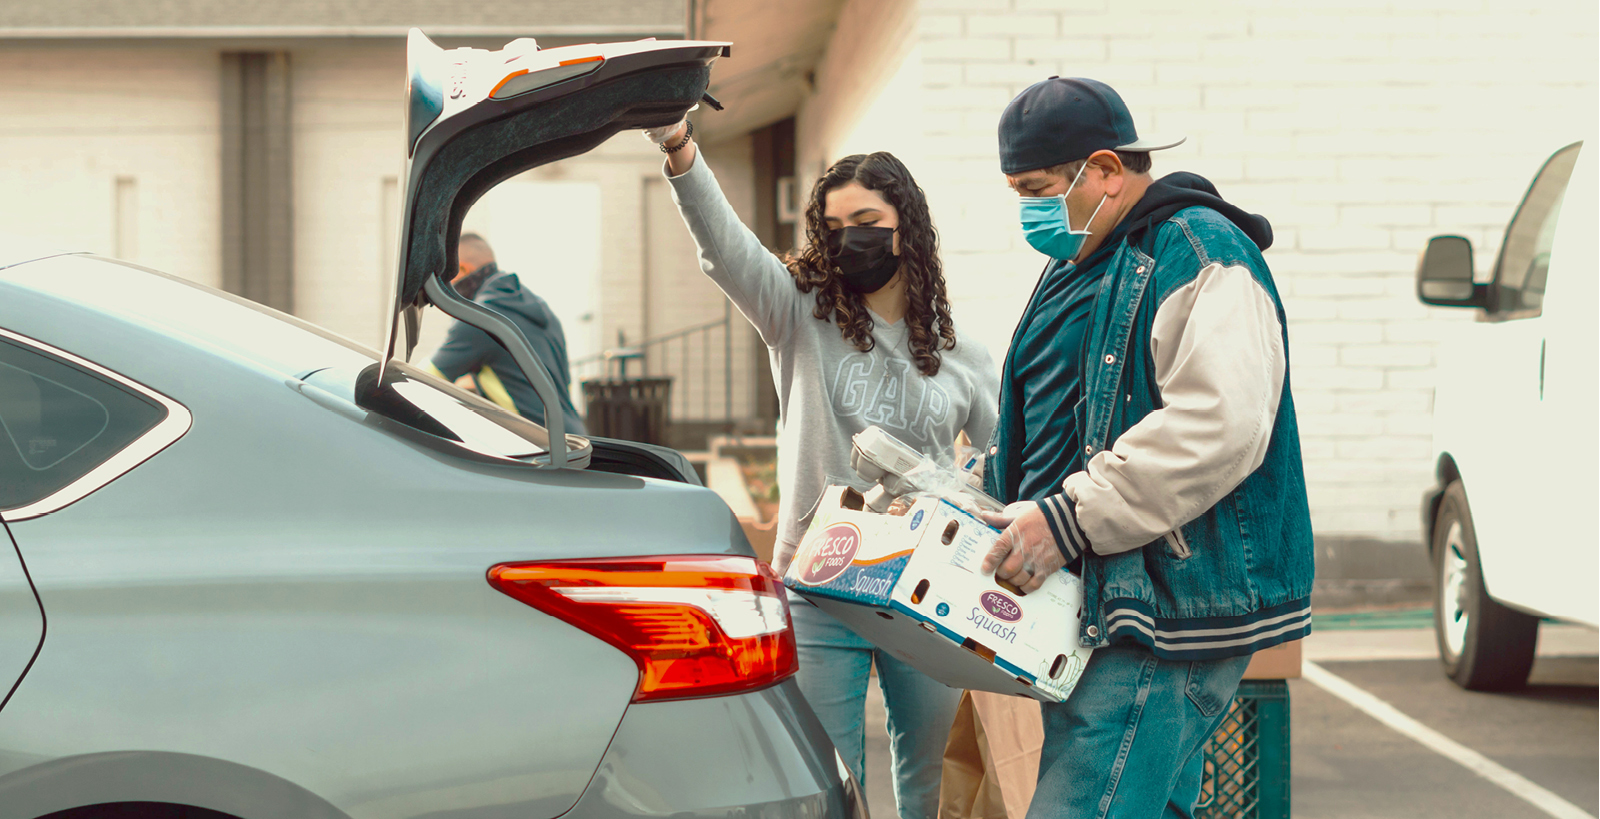 Masked man and woman load boxes into the trunk of a gray sedan